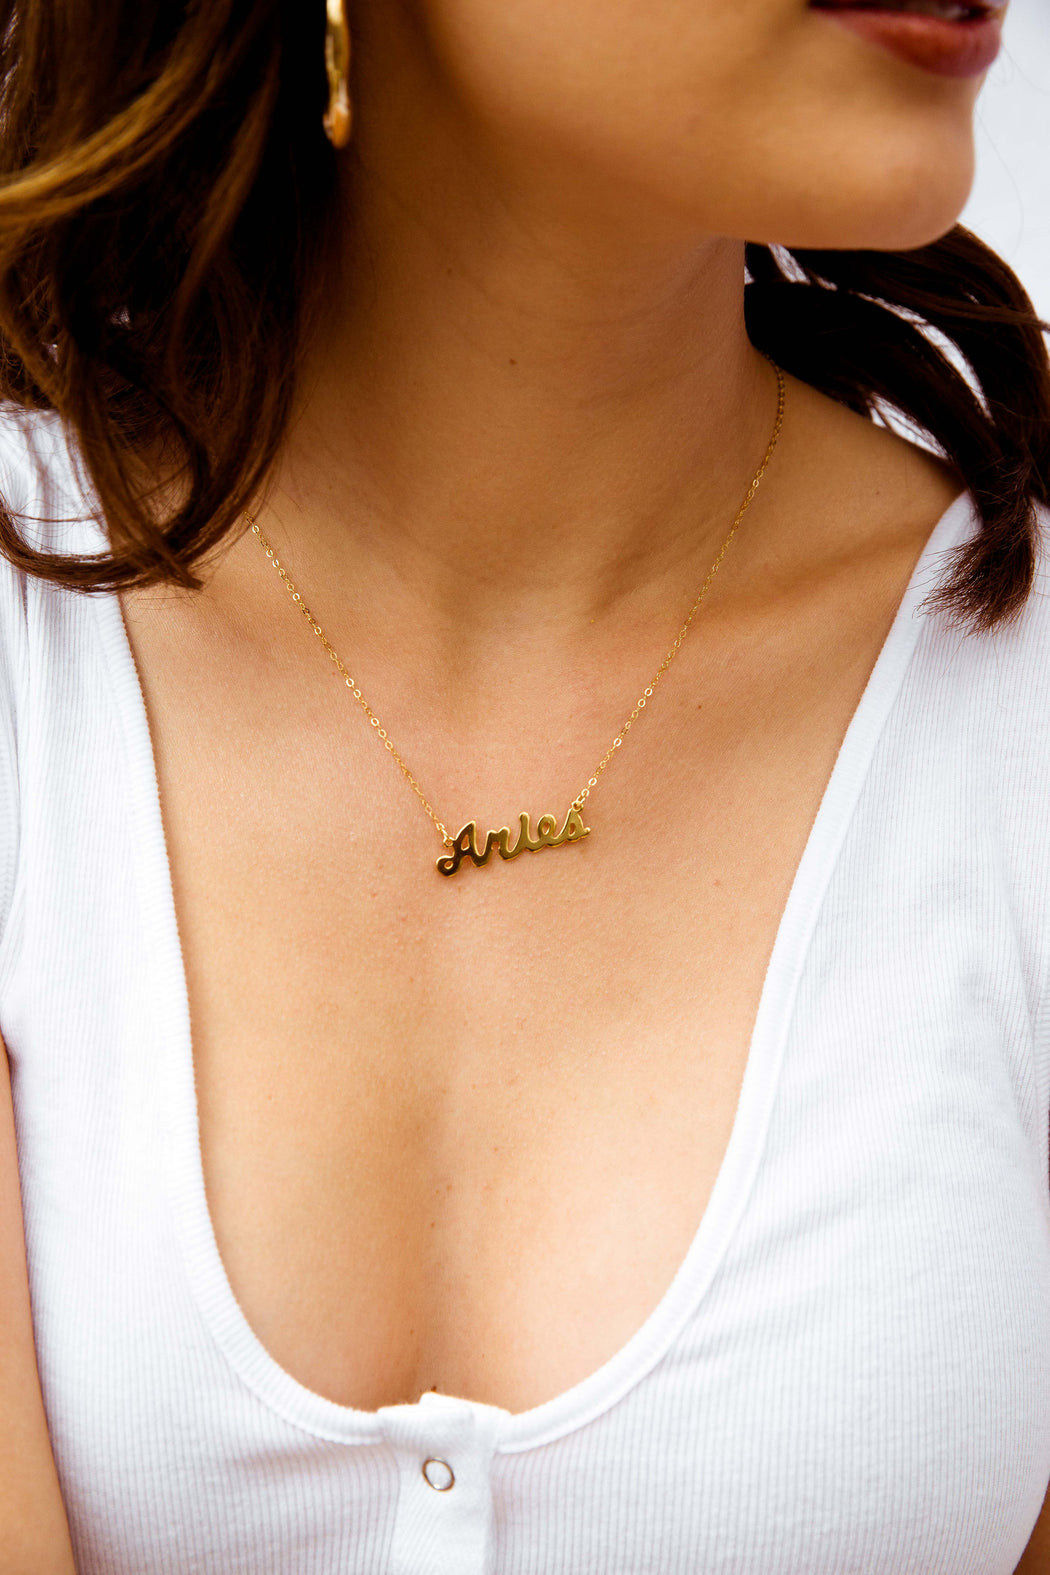 Star Sign Necklace - Aries